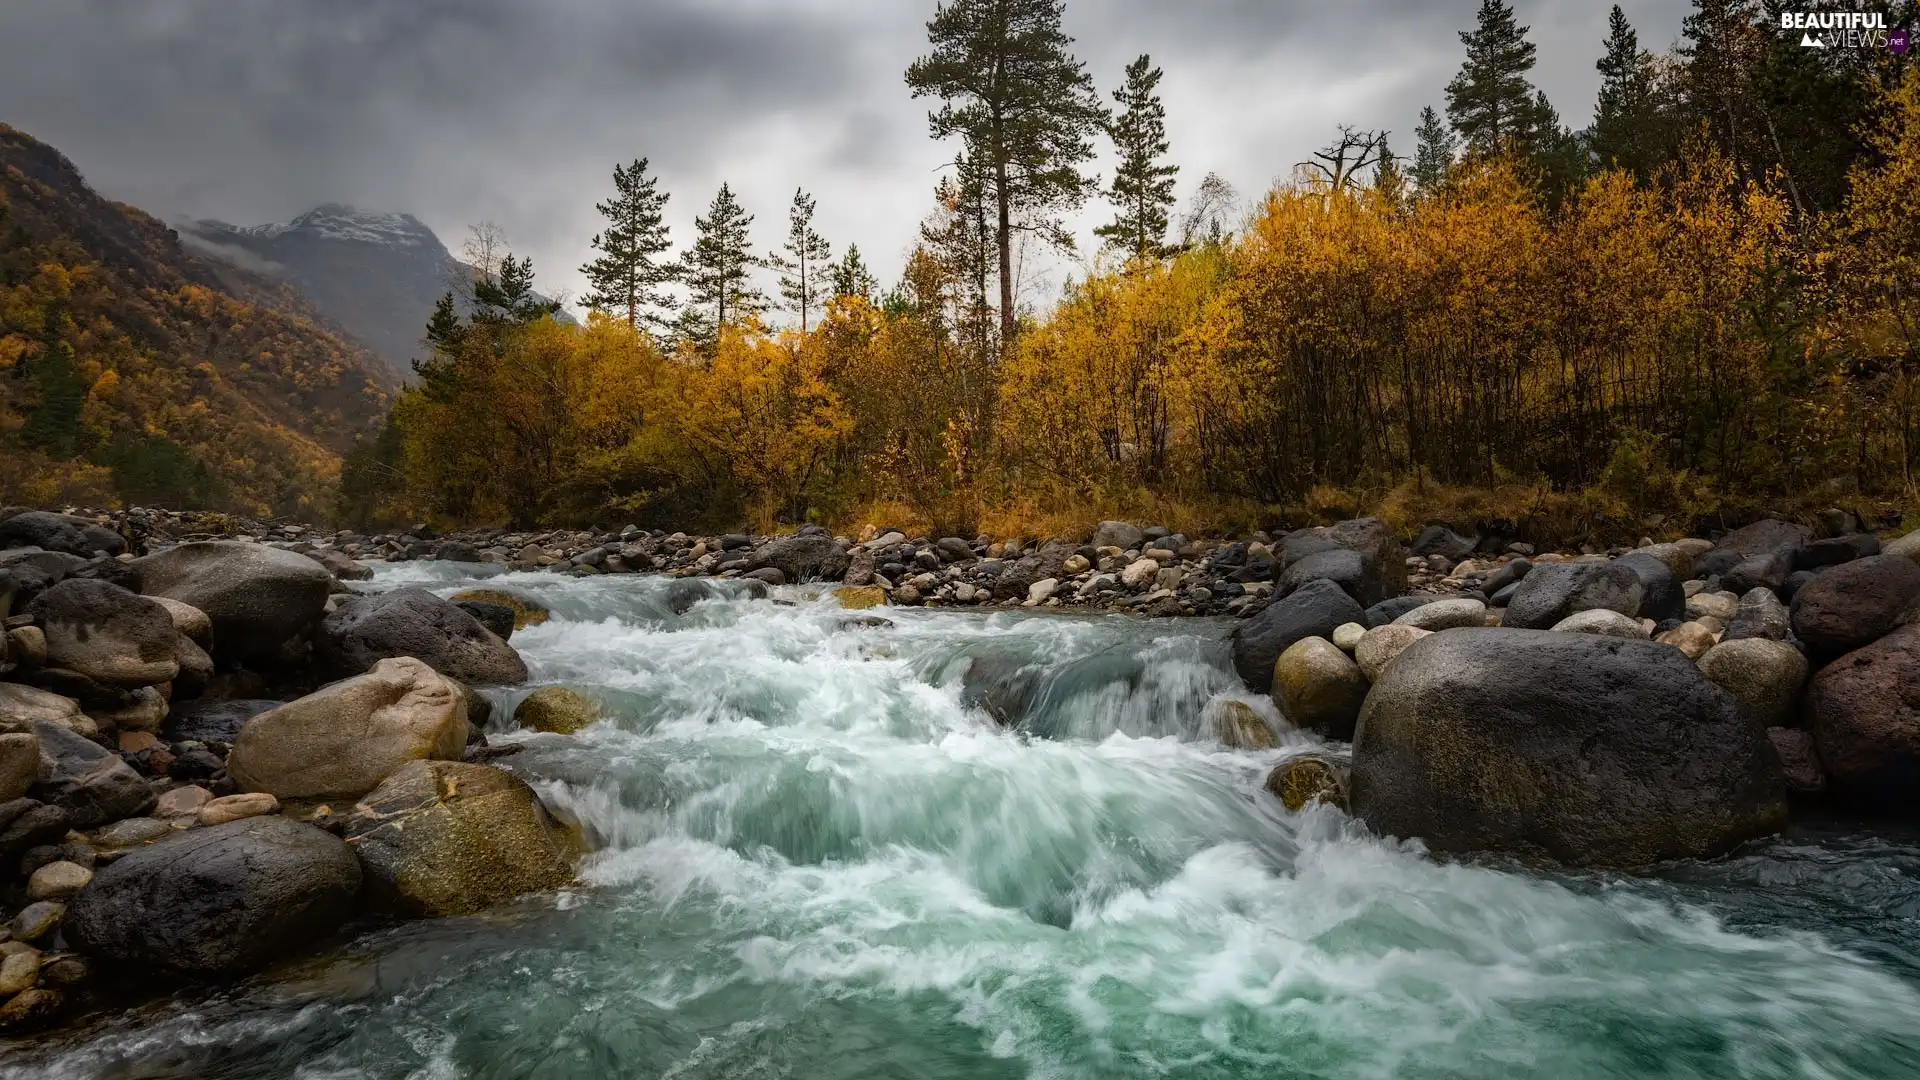 Stones, tear, viewes, River, autumn, trees, Mountains